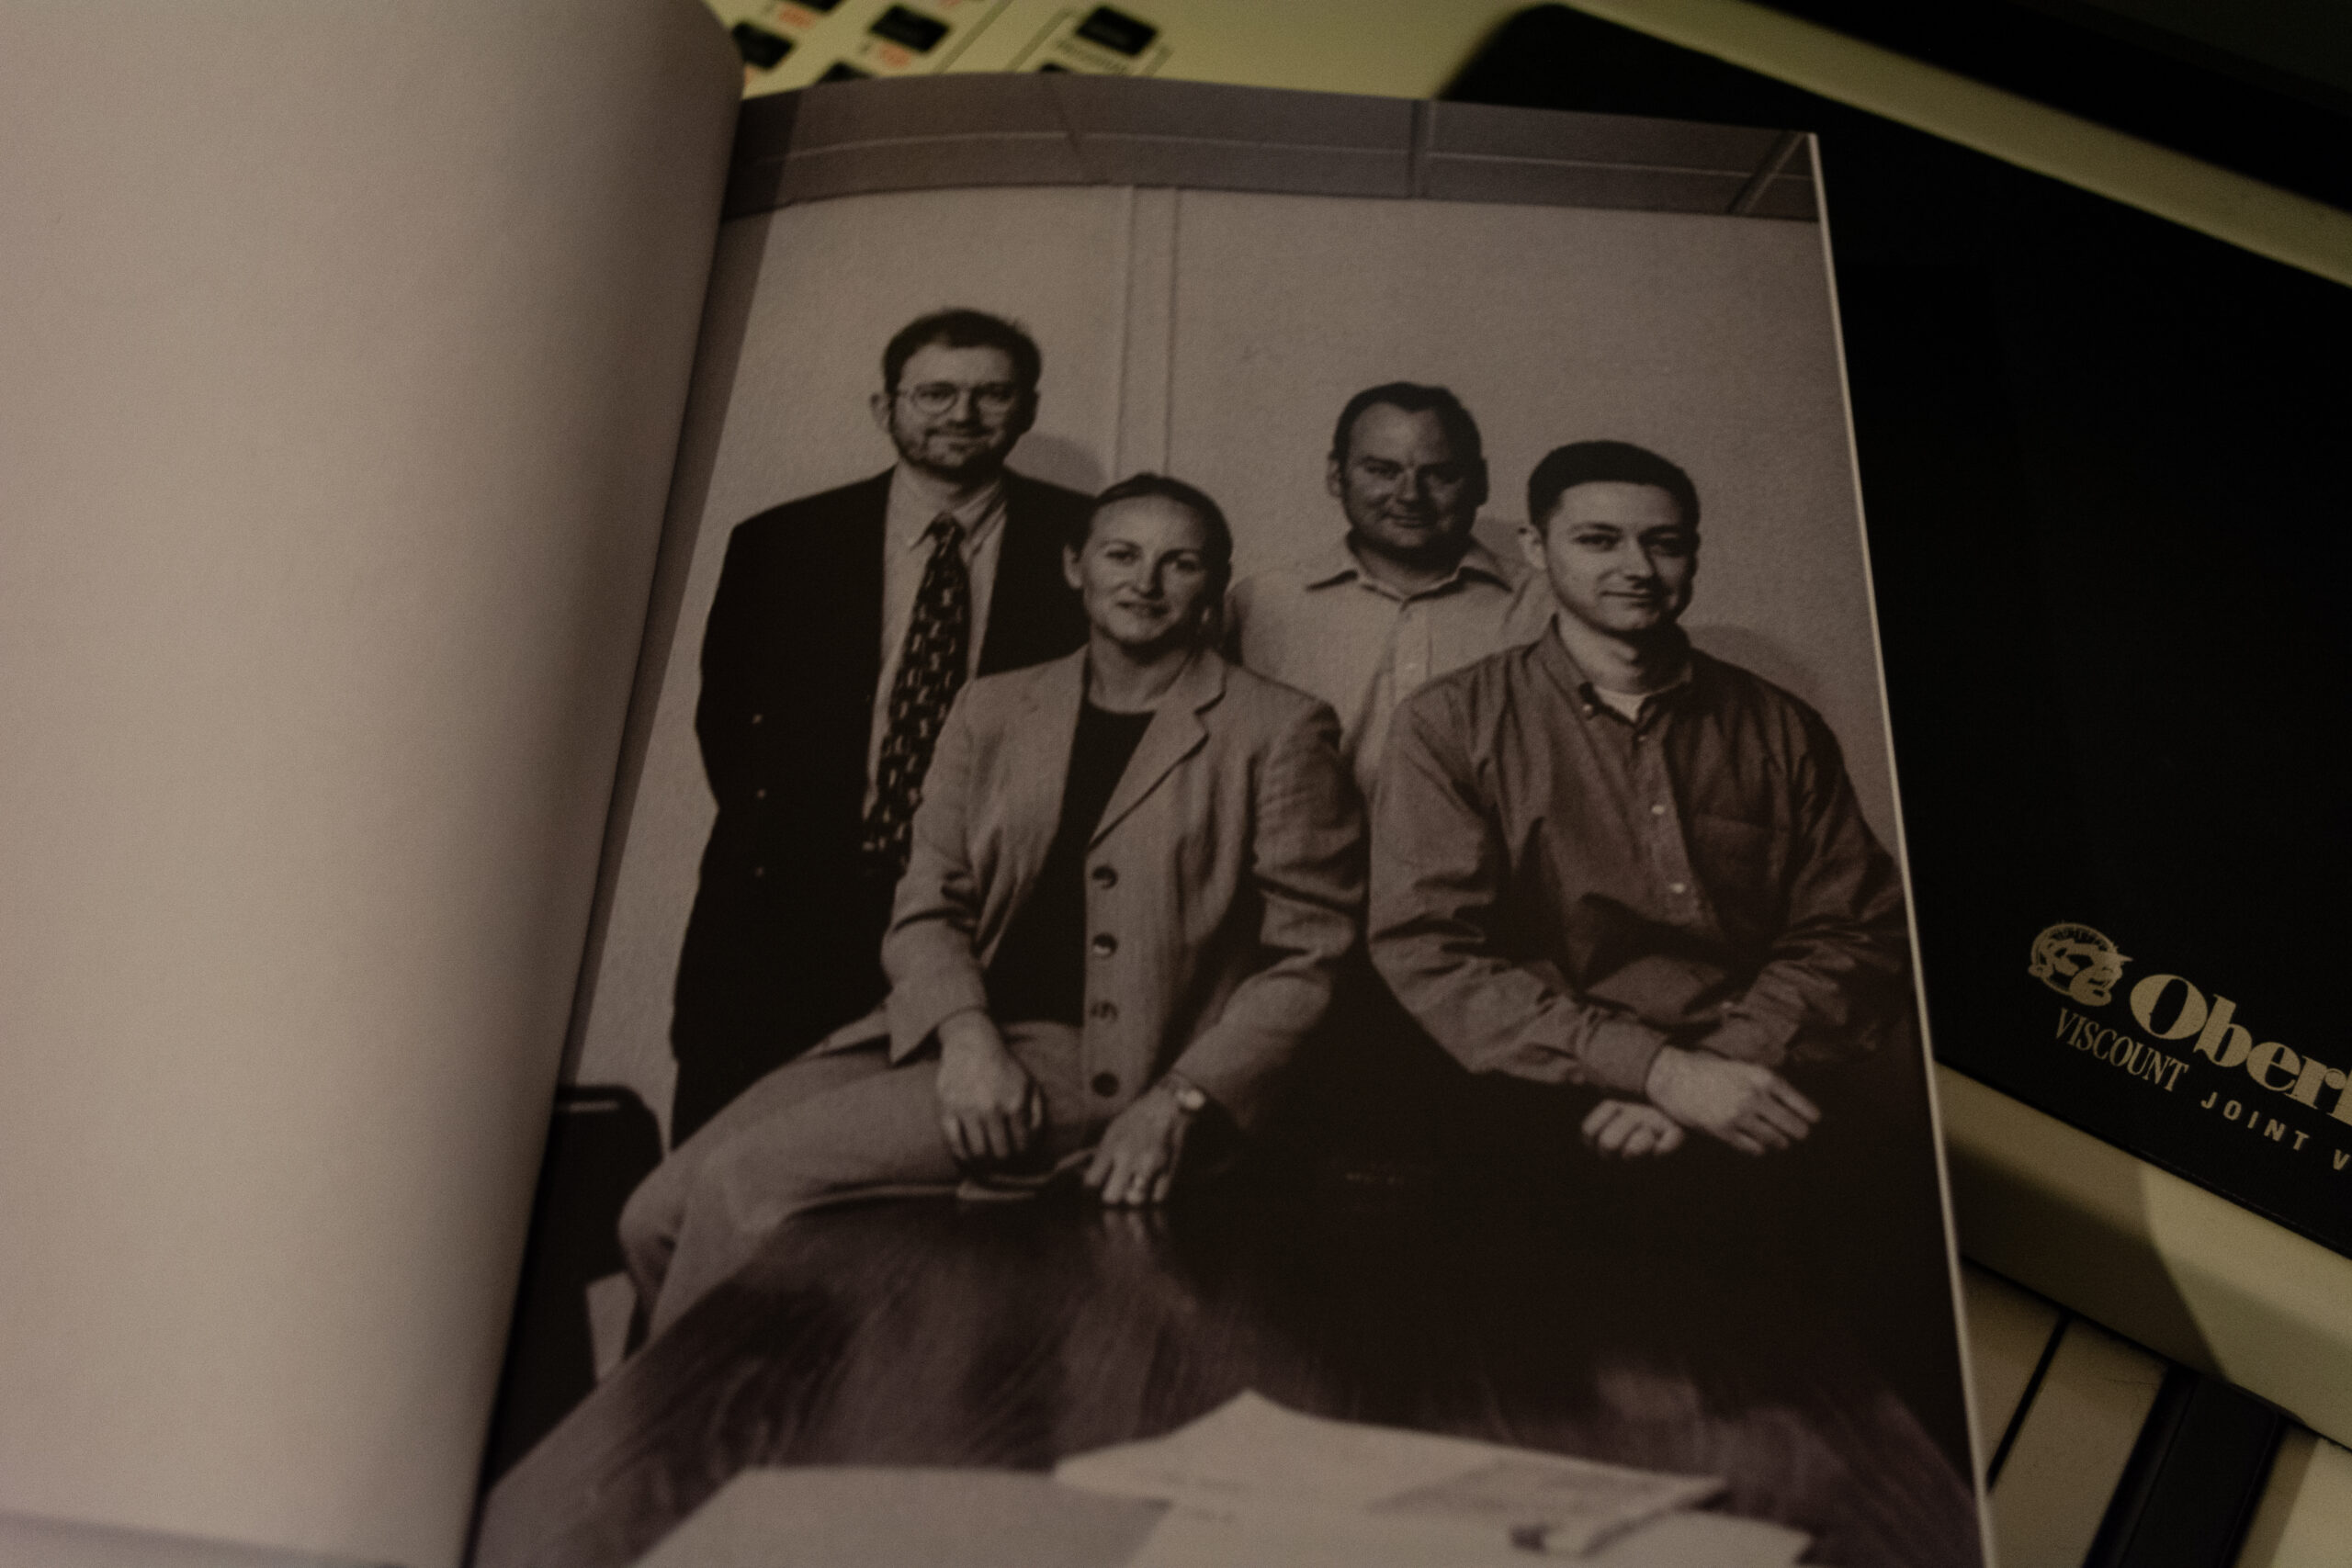 Photograph of the Revolution Software team in Tony Warriner - Revolution: The Quest for Game Development Greatness book